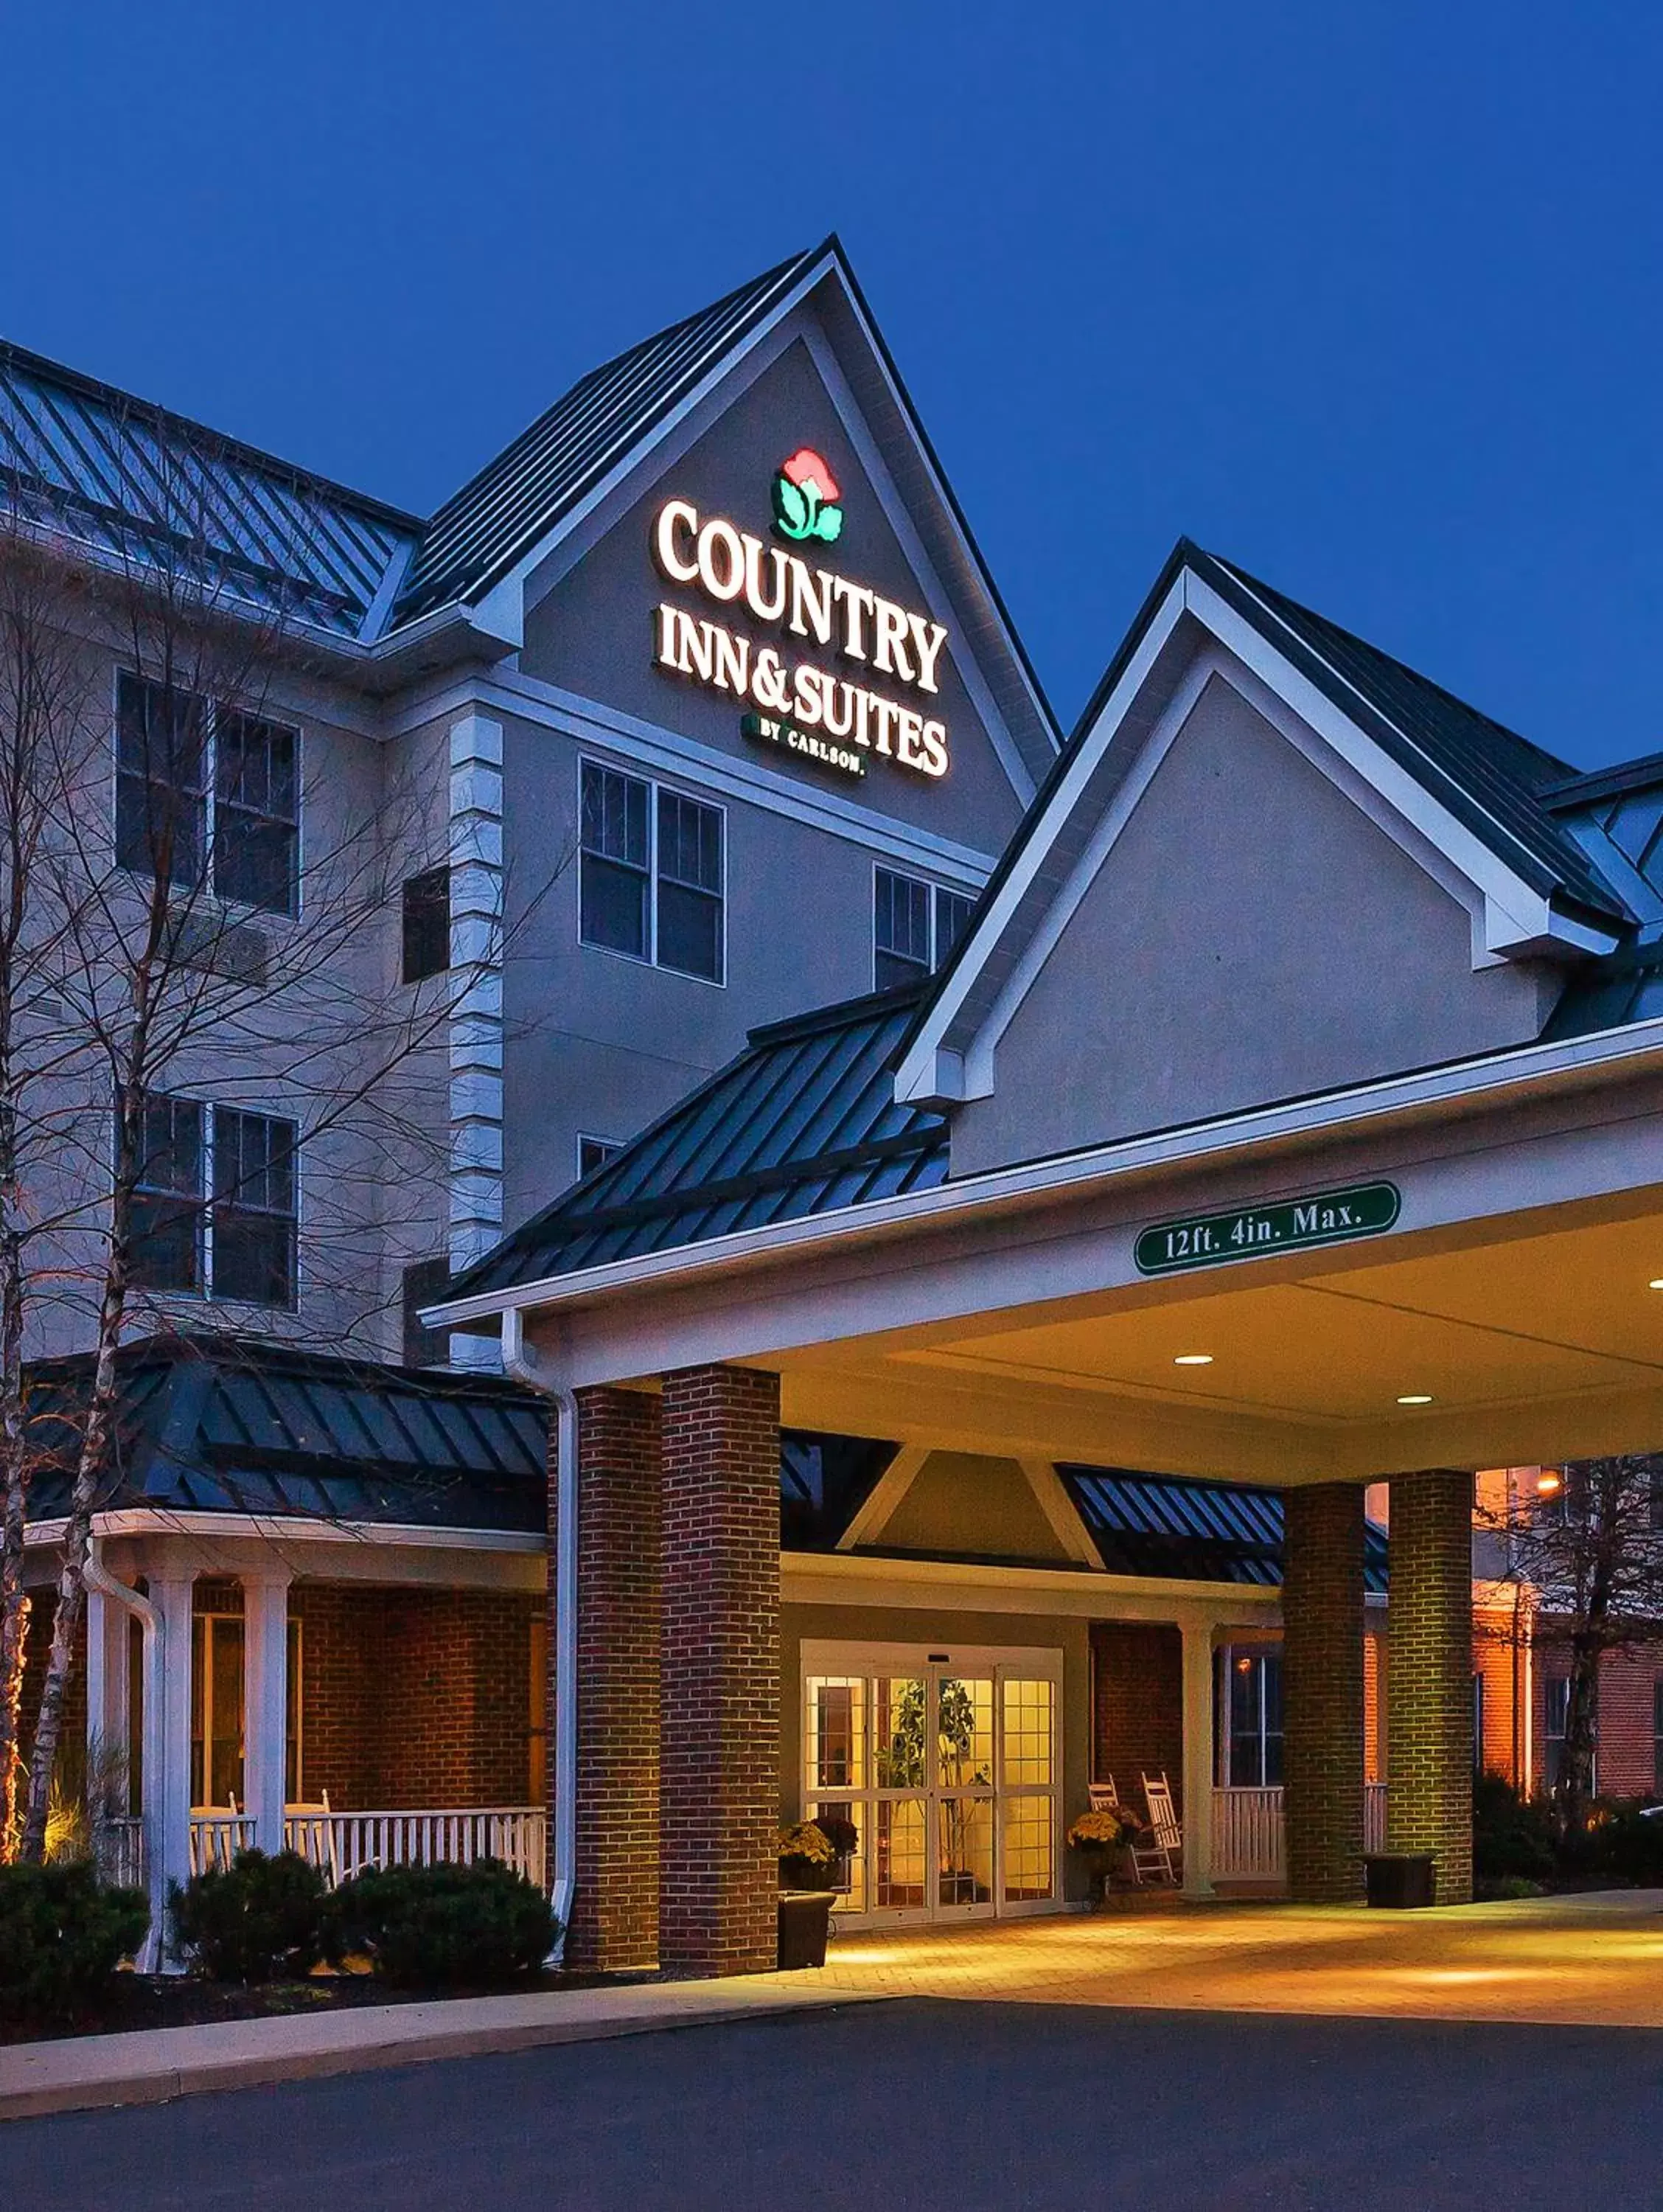 Facade/entrance, Property Building in Country Inn & Suites by Radisson, Lewisburg, PA